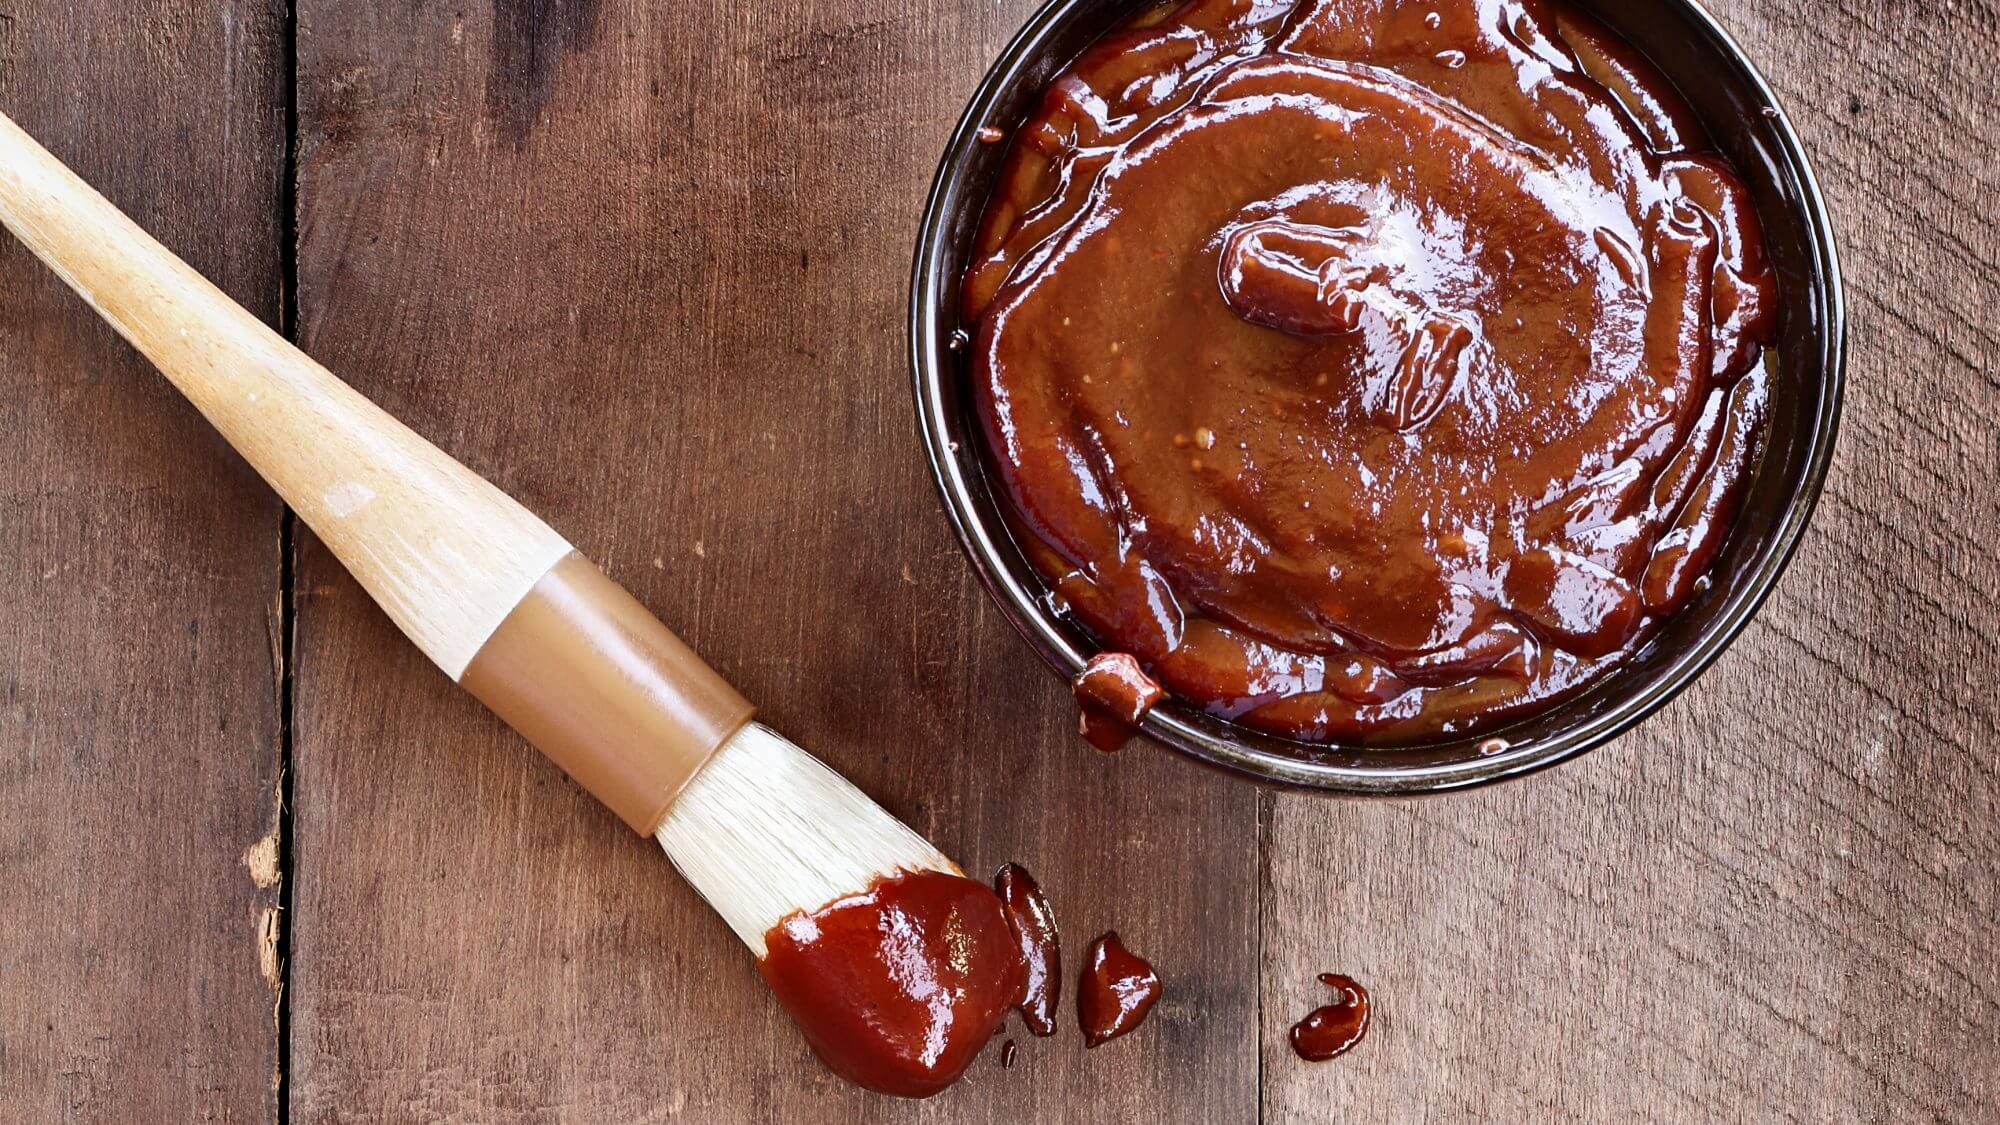 4 Homemade BBQ Sauce Recipes To Try This Summer